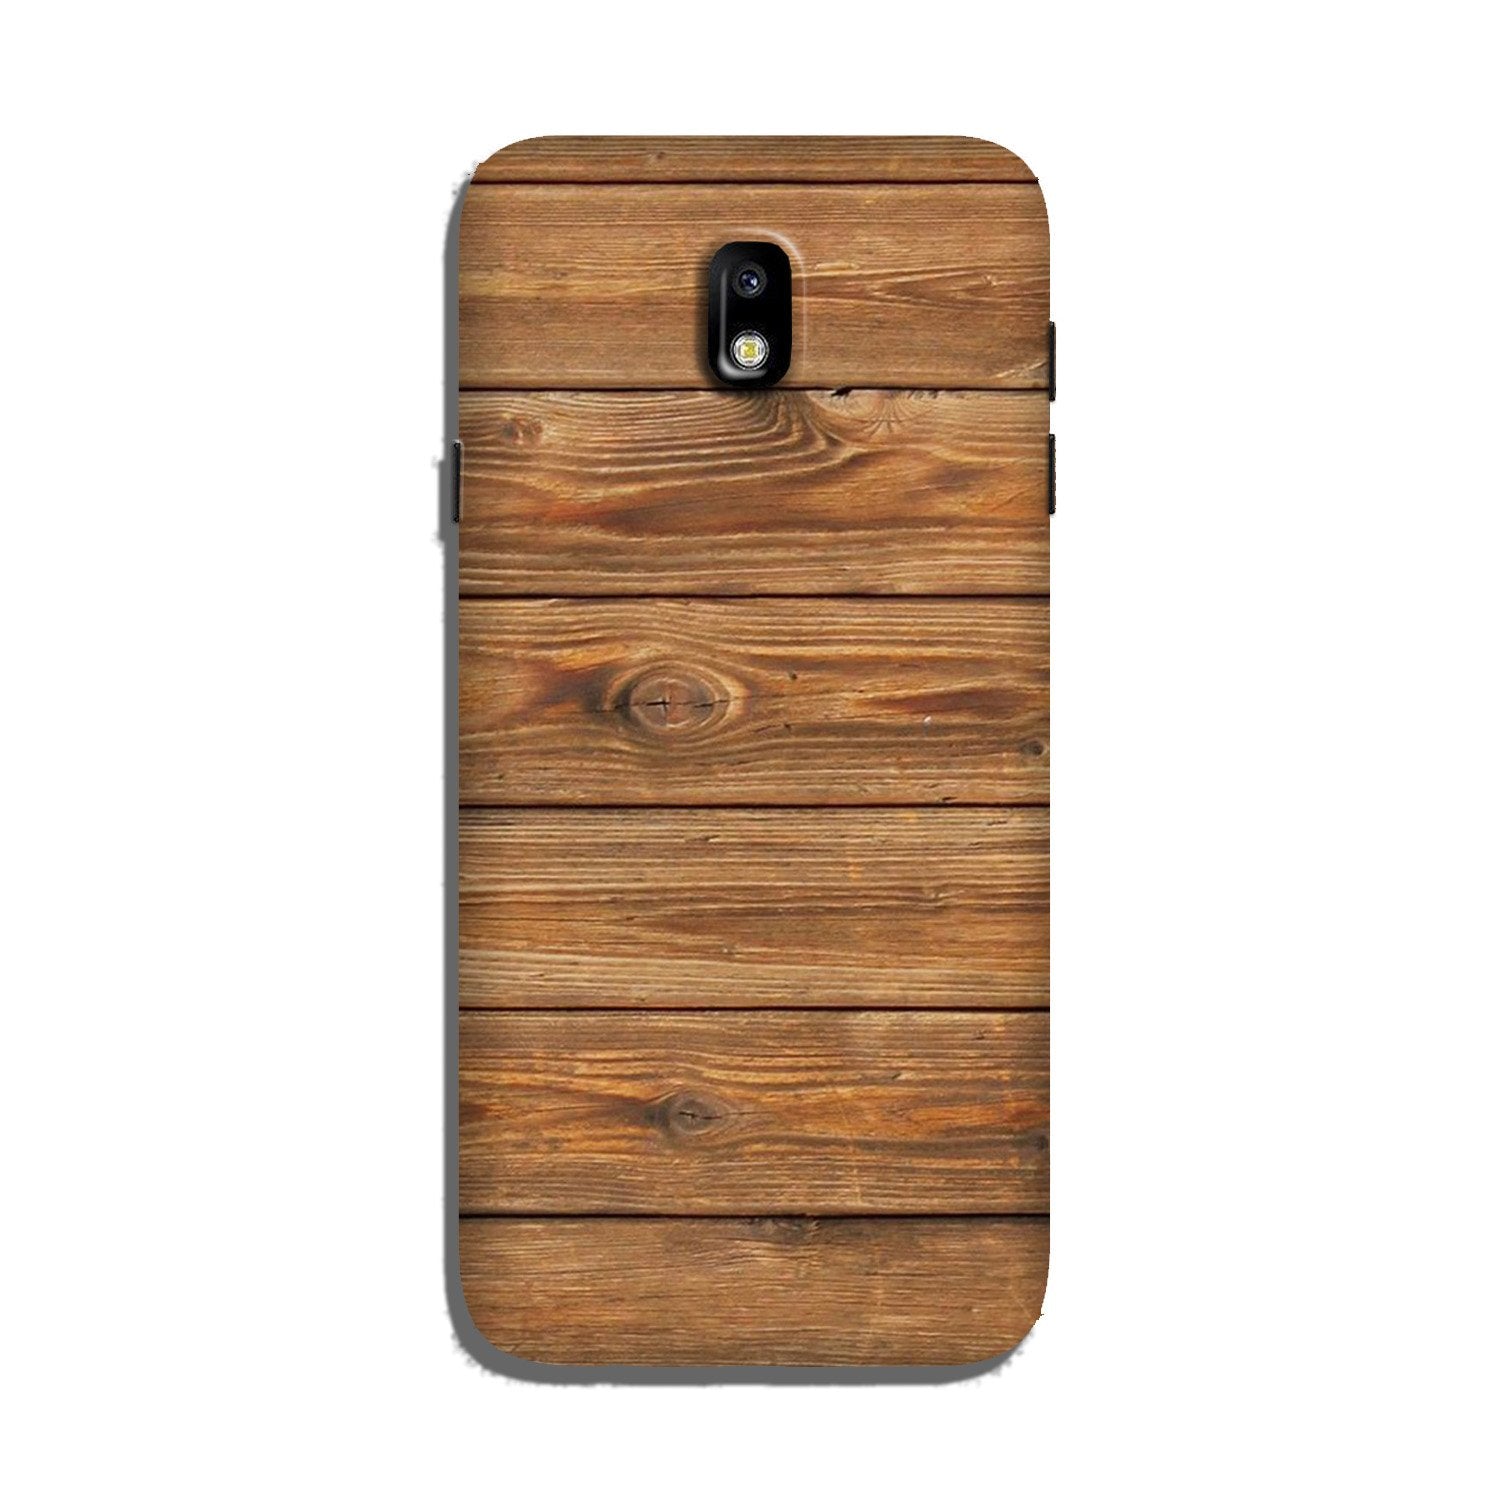 Wooden Look Case for Galaxy J5 Pro(Design - 113)